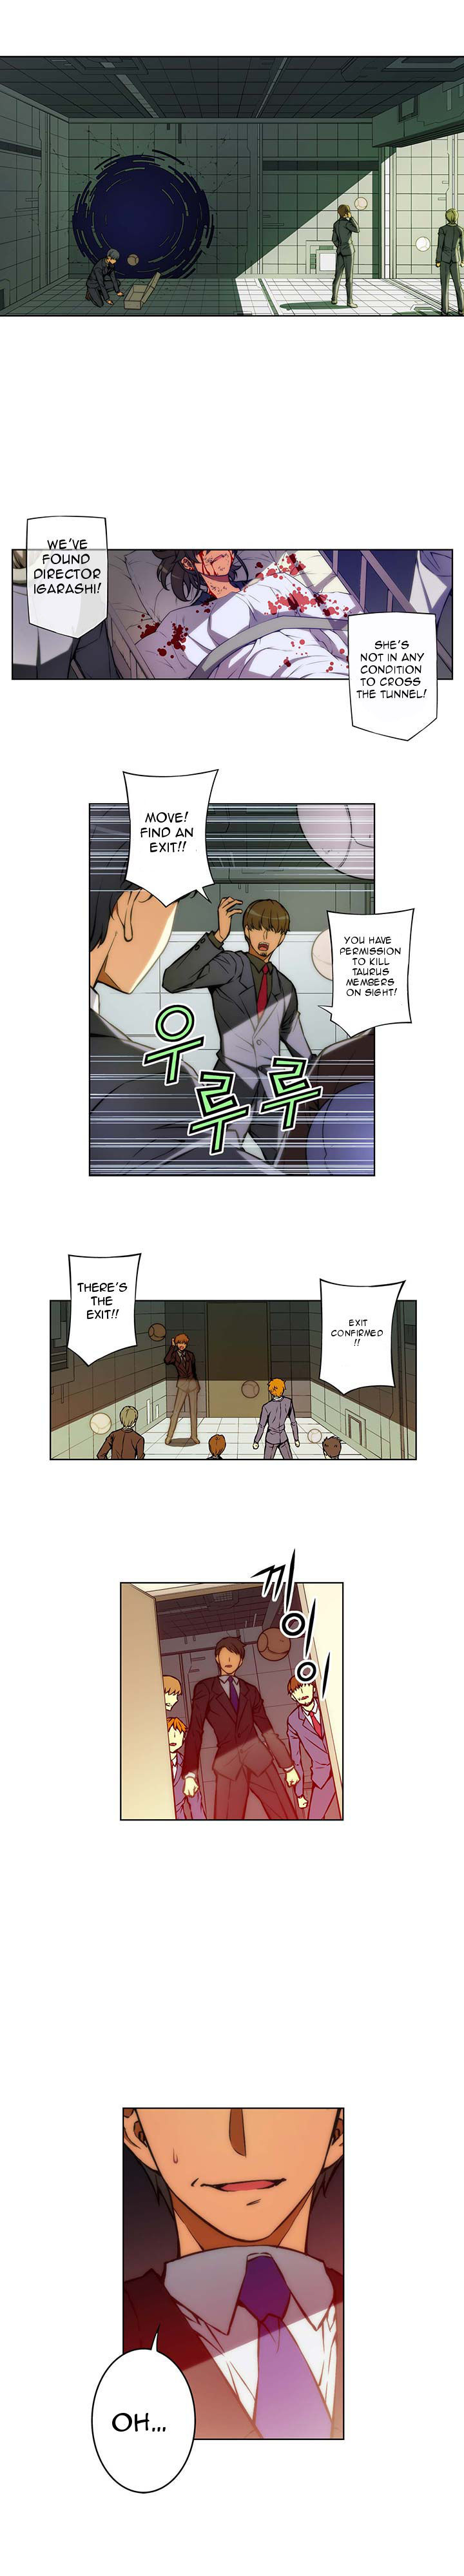 Rebirth 2 The Life Taker Chapter 9 Page 4